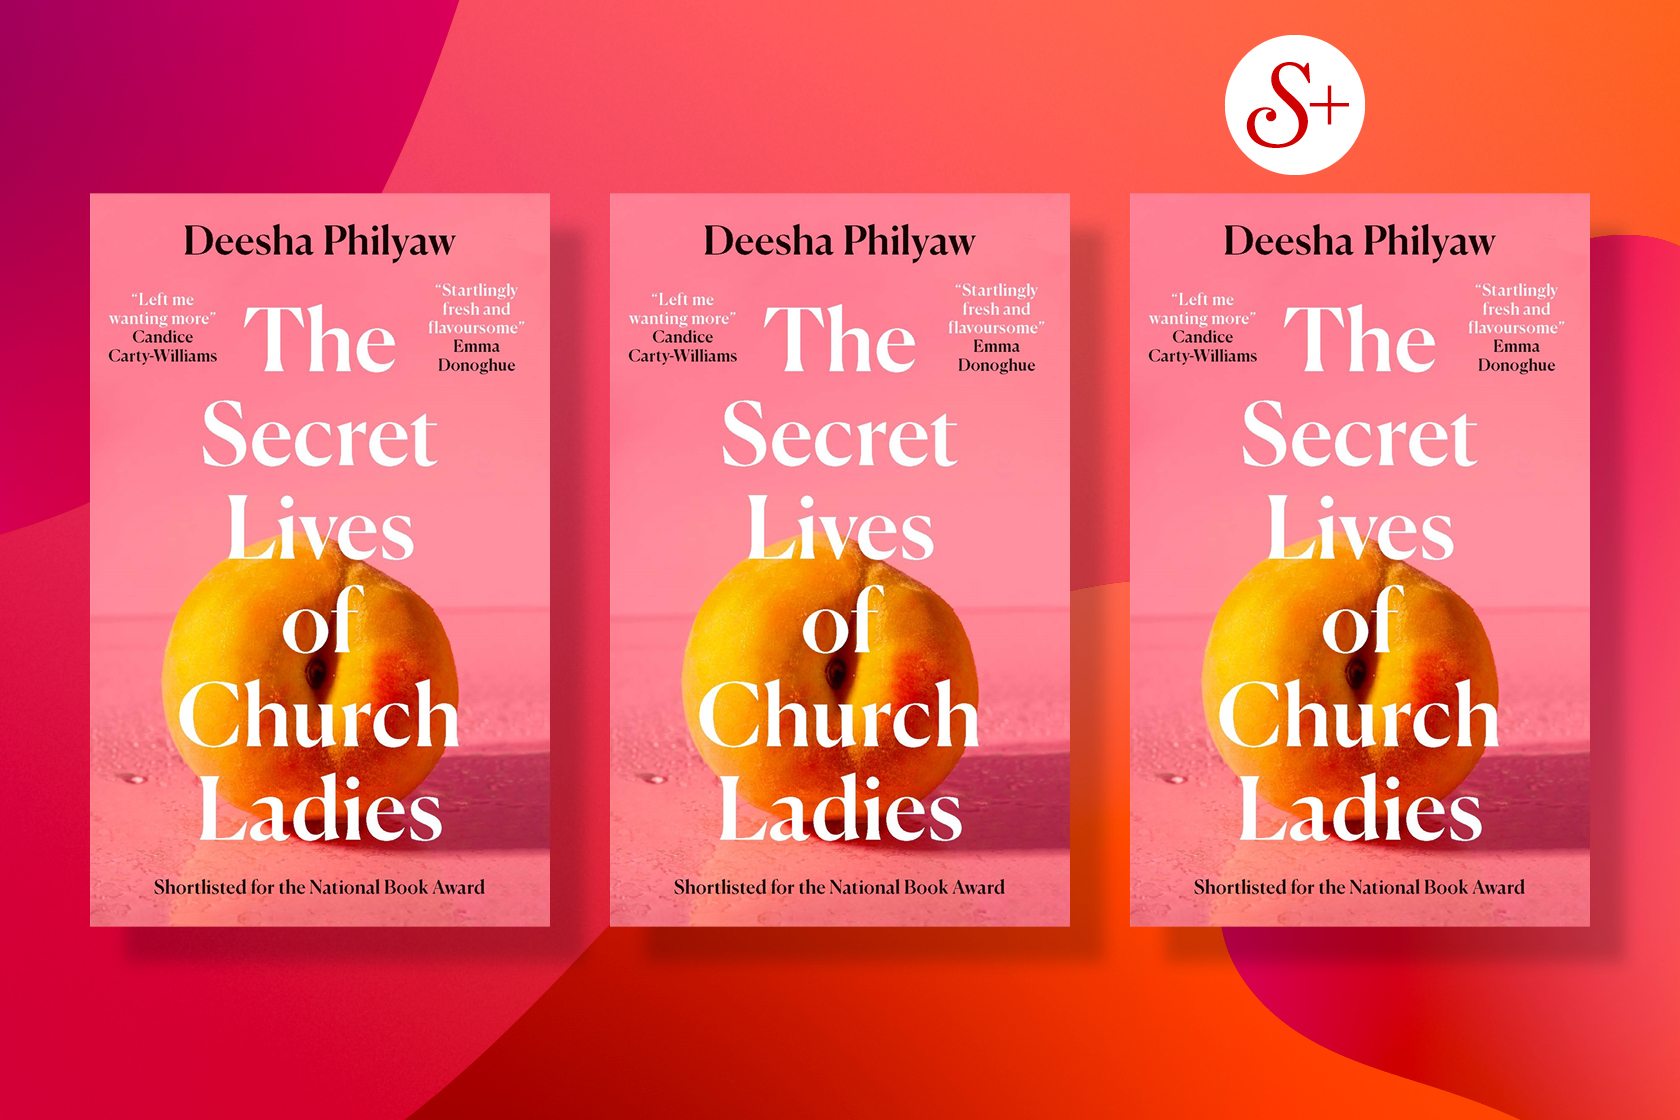 A Short Story From The Secret Lives Of Church Ladies